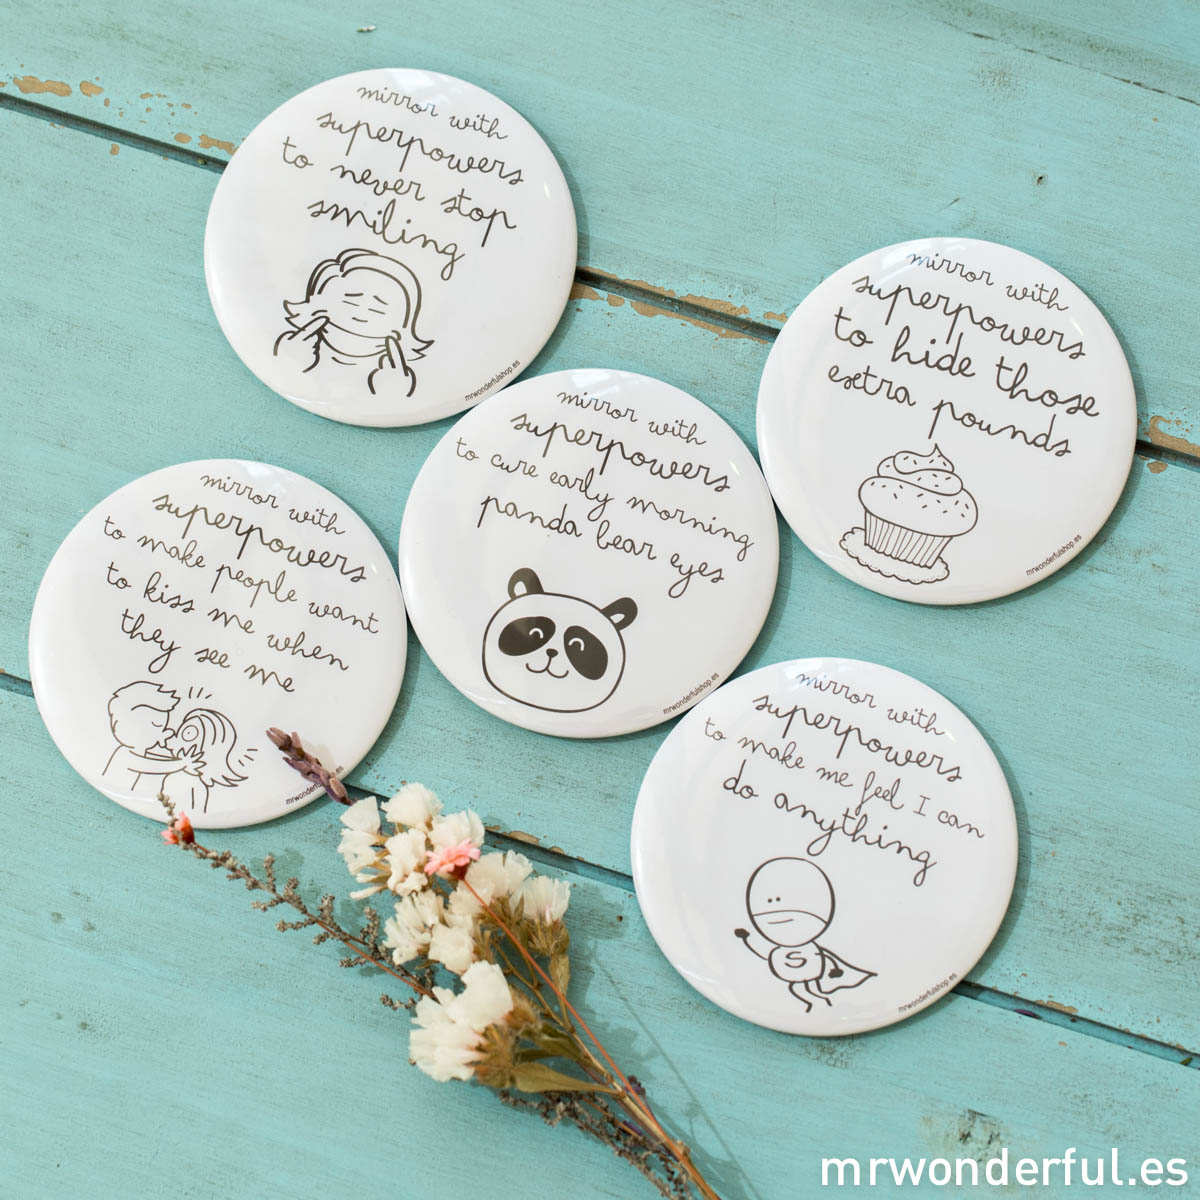 mrwonderful_ESP045_pack-05-mirrors-with-superpowers-for-celebration-2